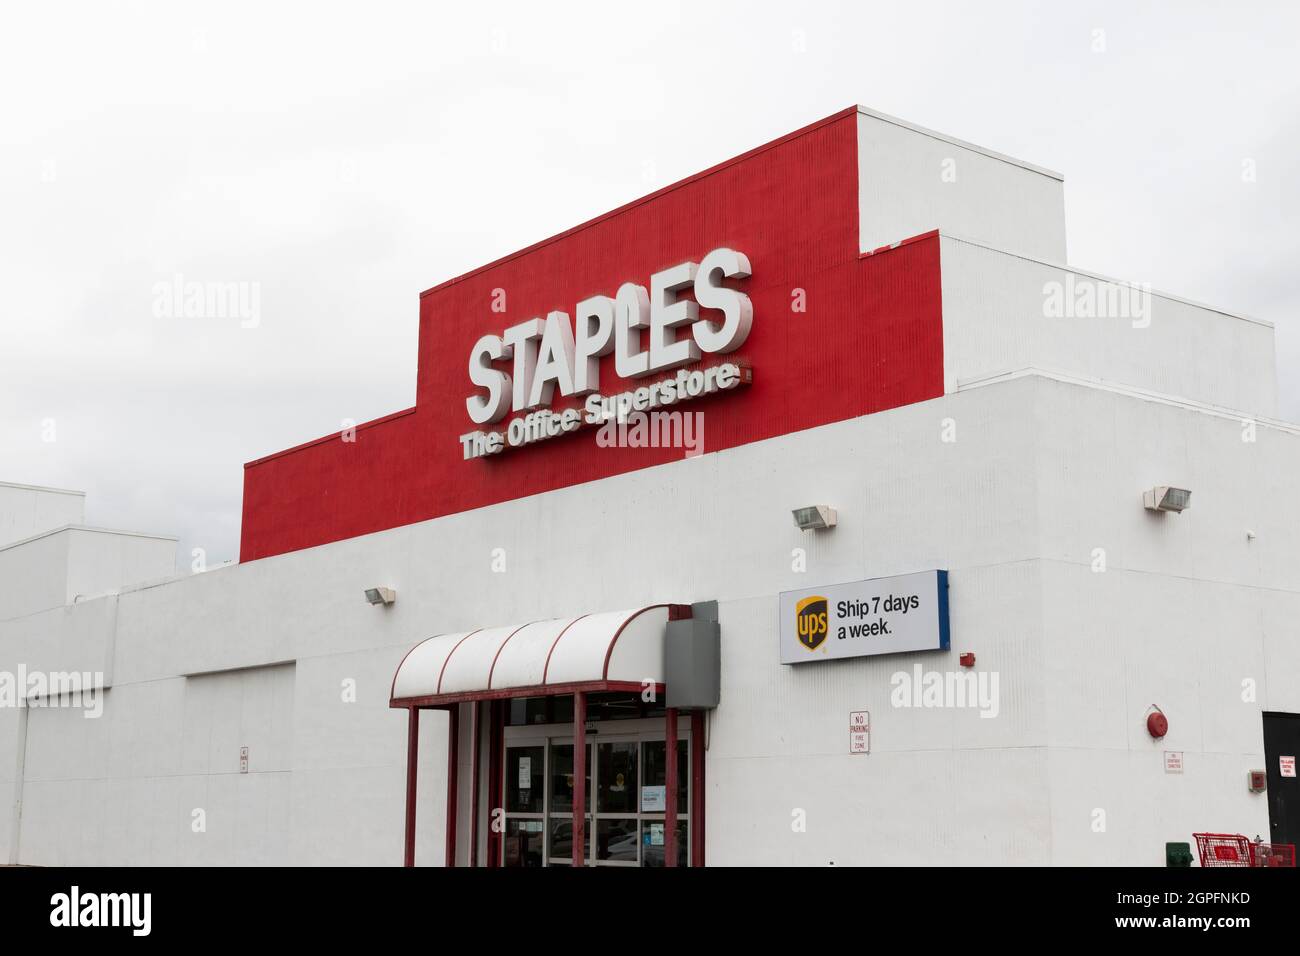 North Babylon, New York, USA - 18 August 2021: The entrance of a Staples office supply store with a ups shipping sign. Stock Photo